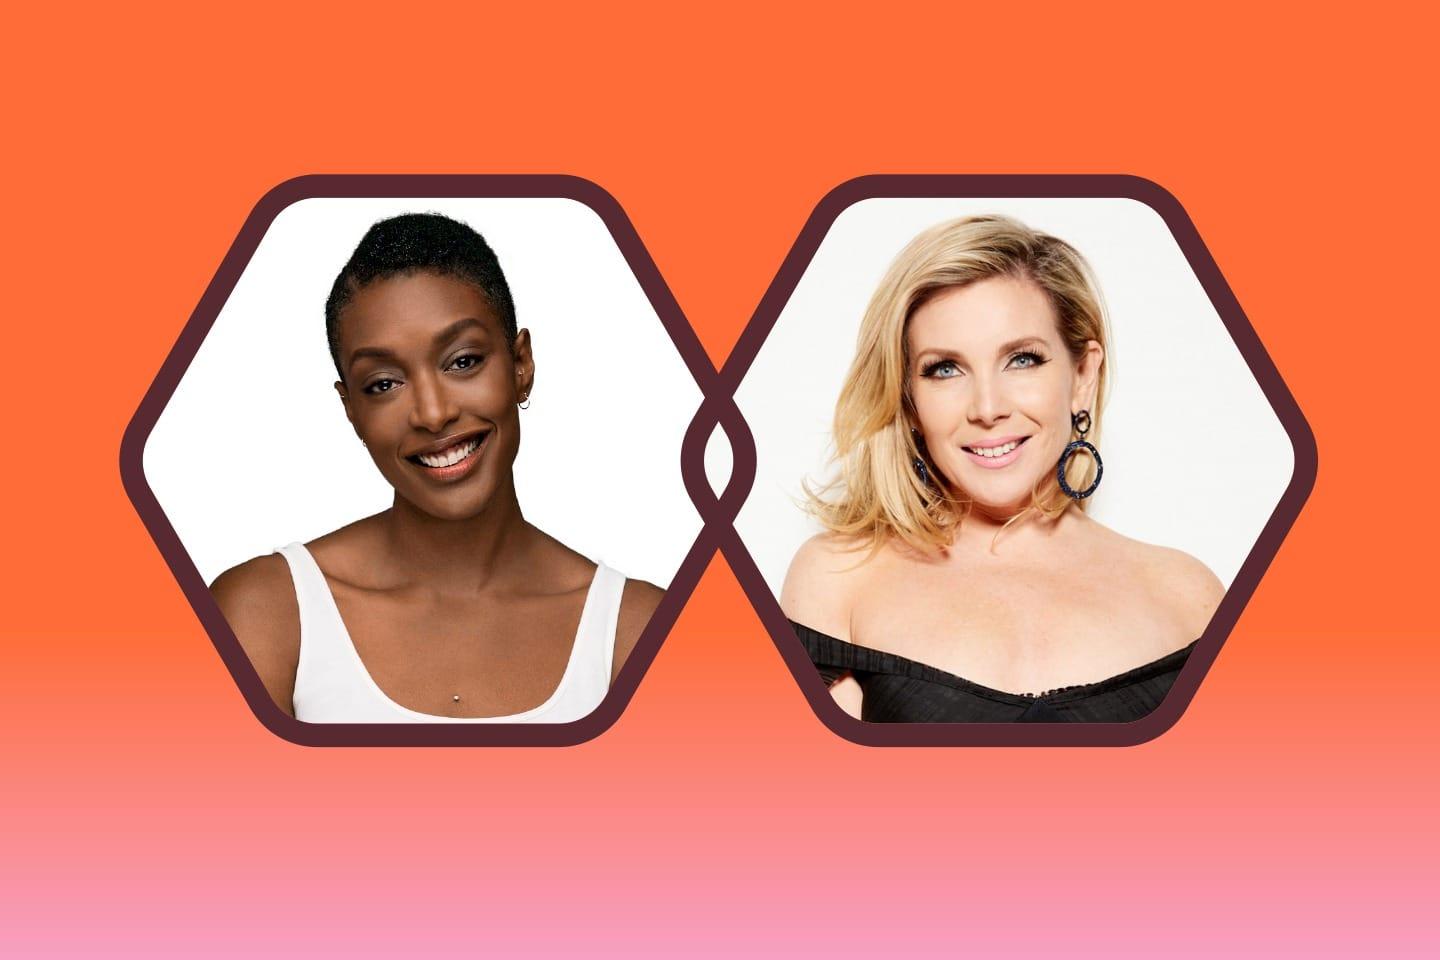 Bumble In Conversation: Talk One-On-One With Actresses and Activists Franchesca Ramsey and June Diane Raphael